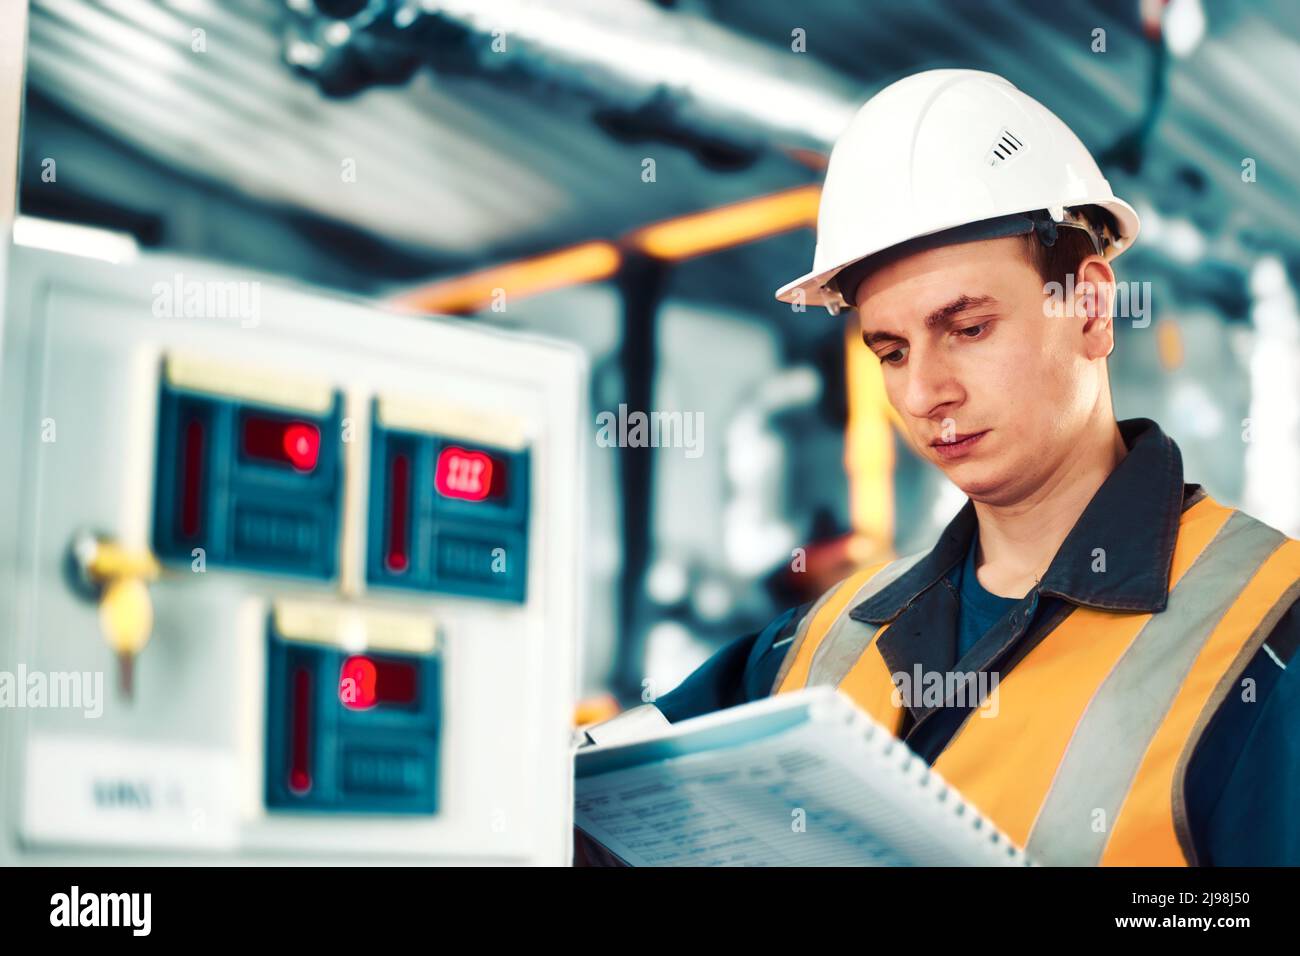 Industrial engineer in helmet inspects or adjusts equipment at gas processing plant or plant. Authentic scene workflow. Stock Photo